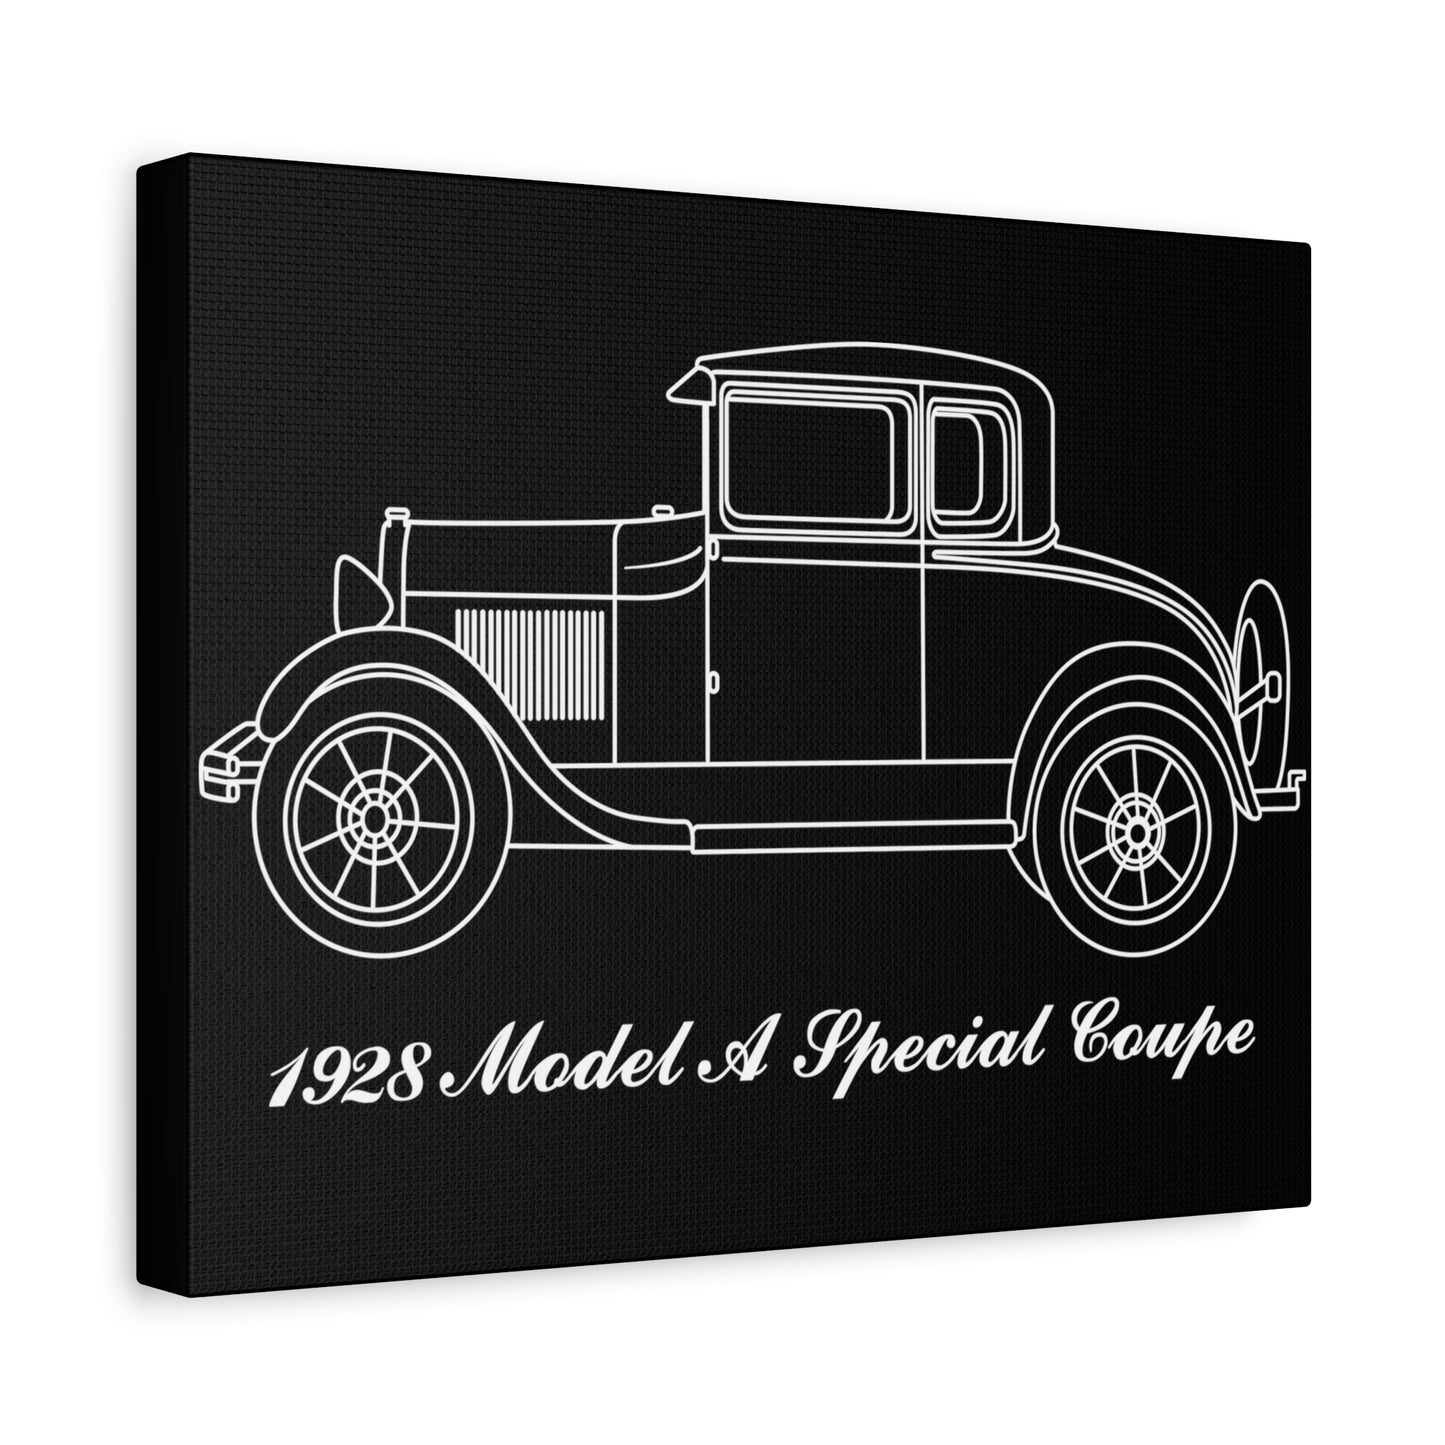 1928 Special Coupe Black Canvas Wall Art